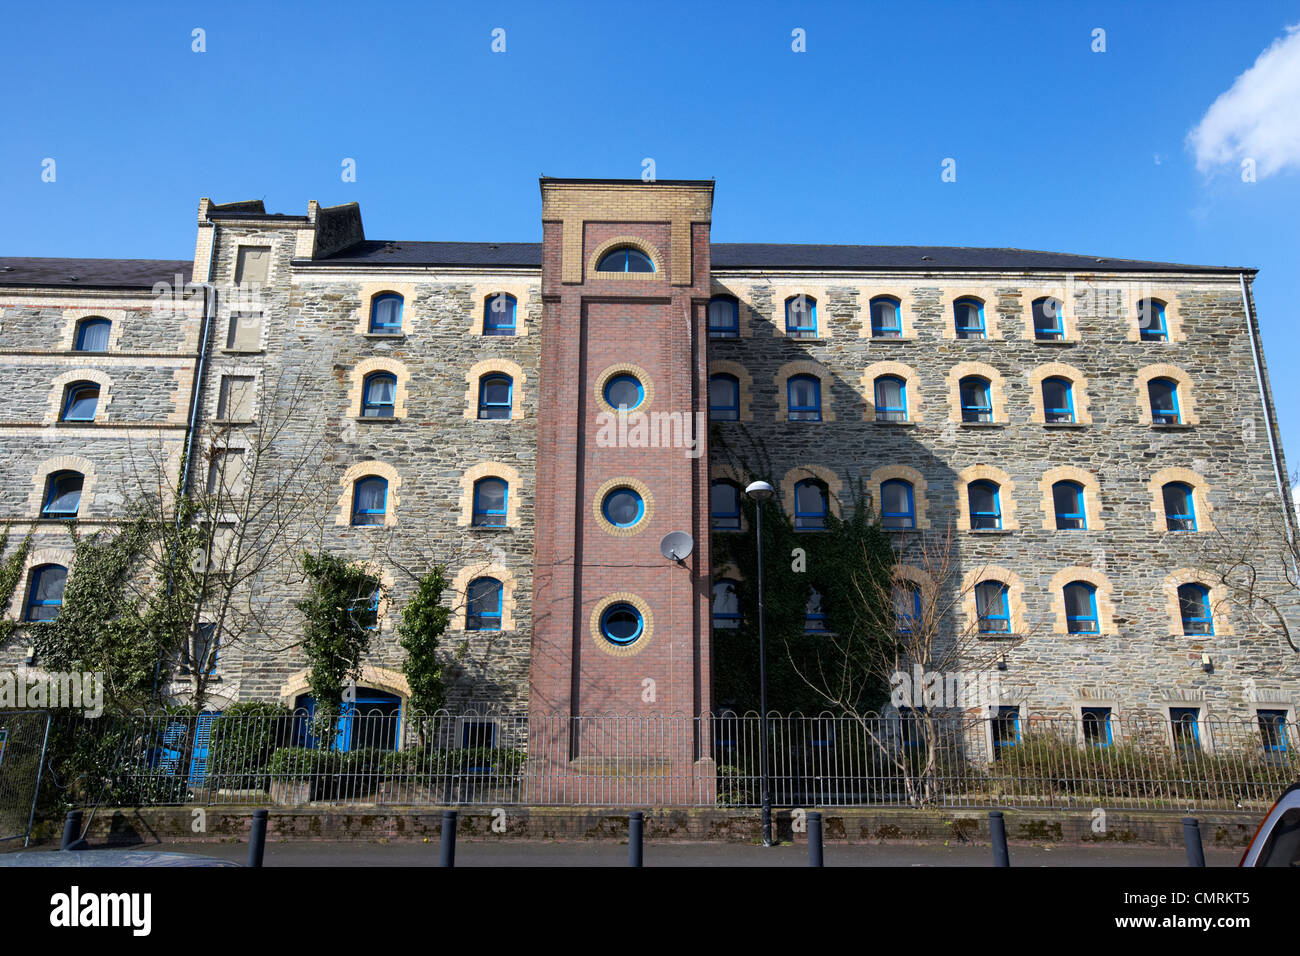 rock mills former flour mills building converted to student accommodation use in Derry city county londonderry northern ireland Stock Photo